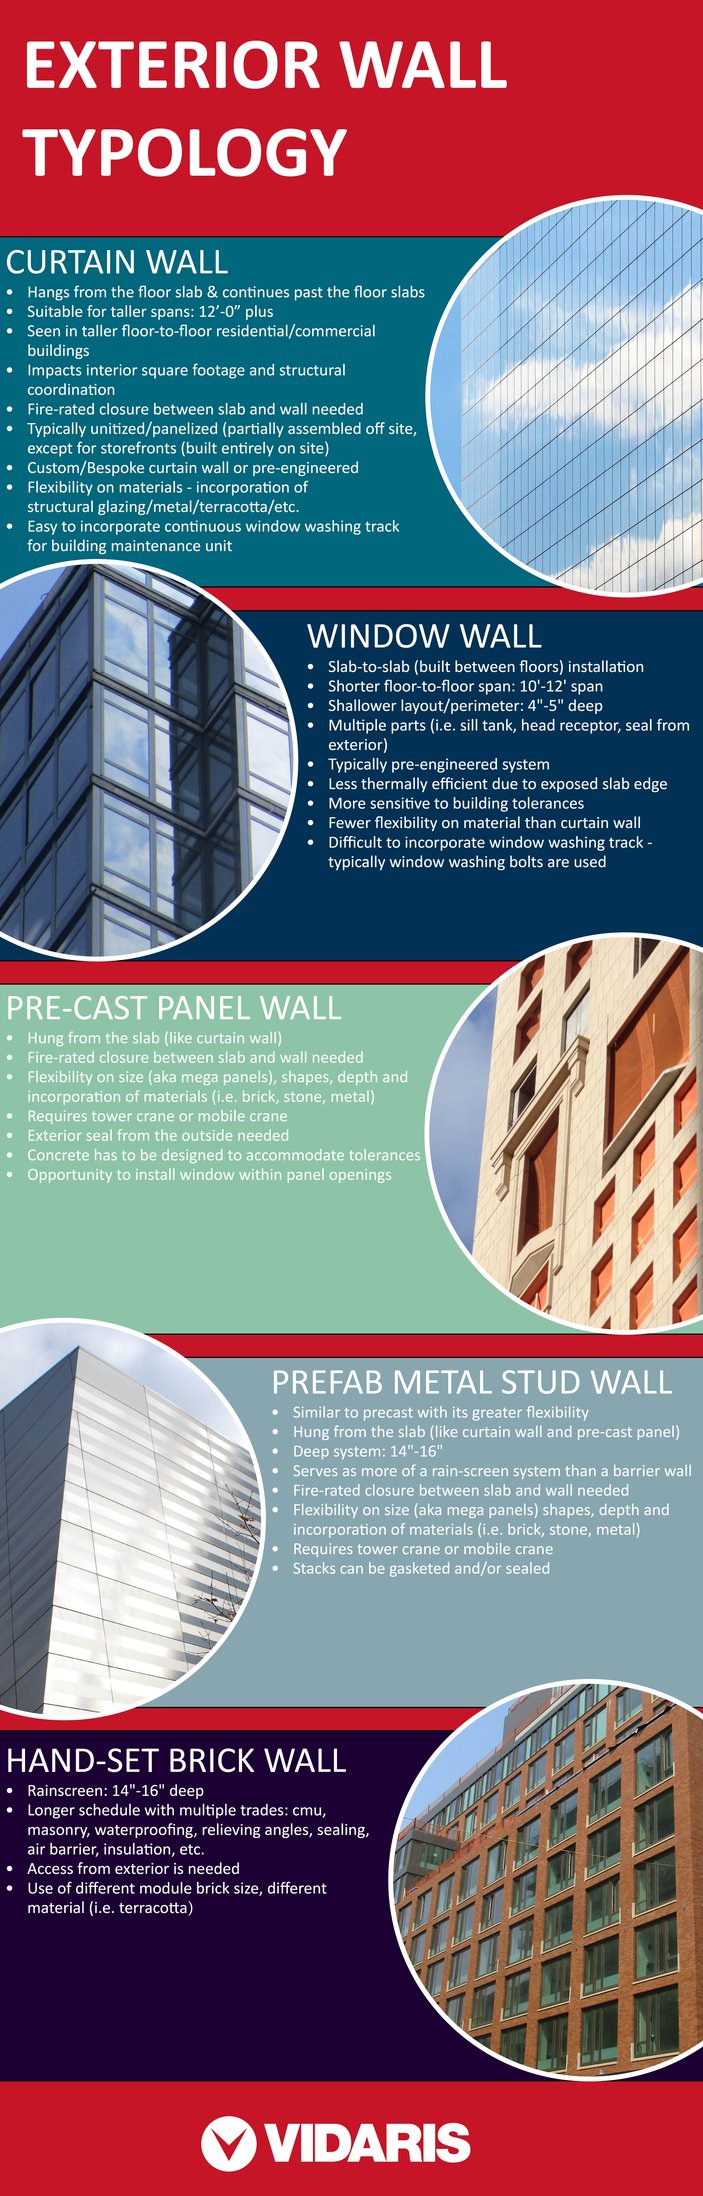 Exterior Wall Typology Infographic.jpg